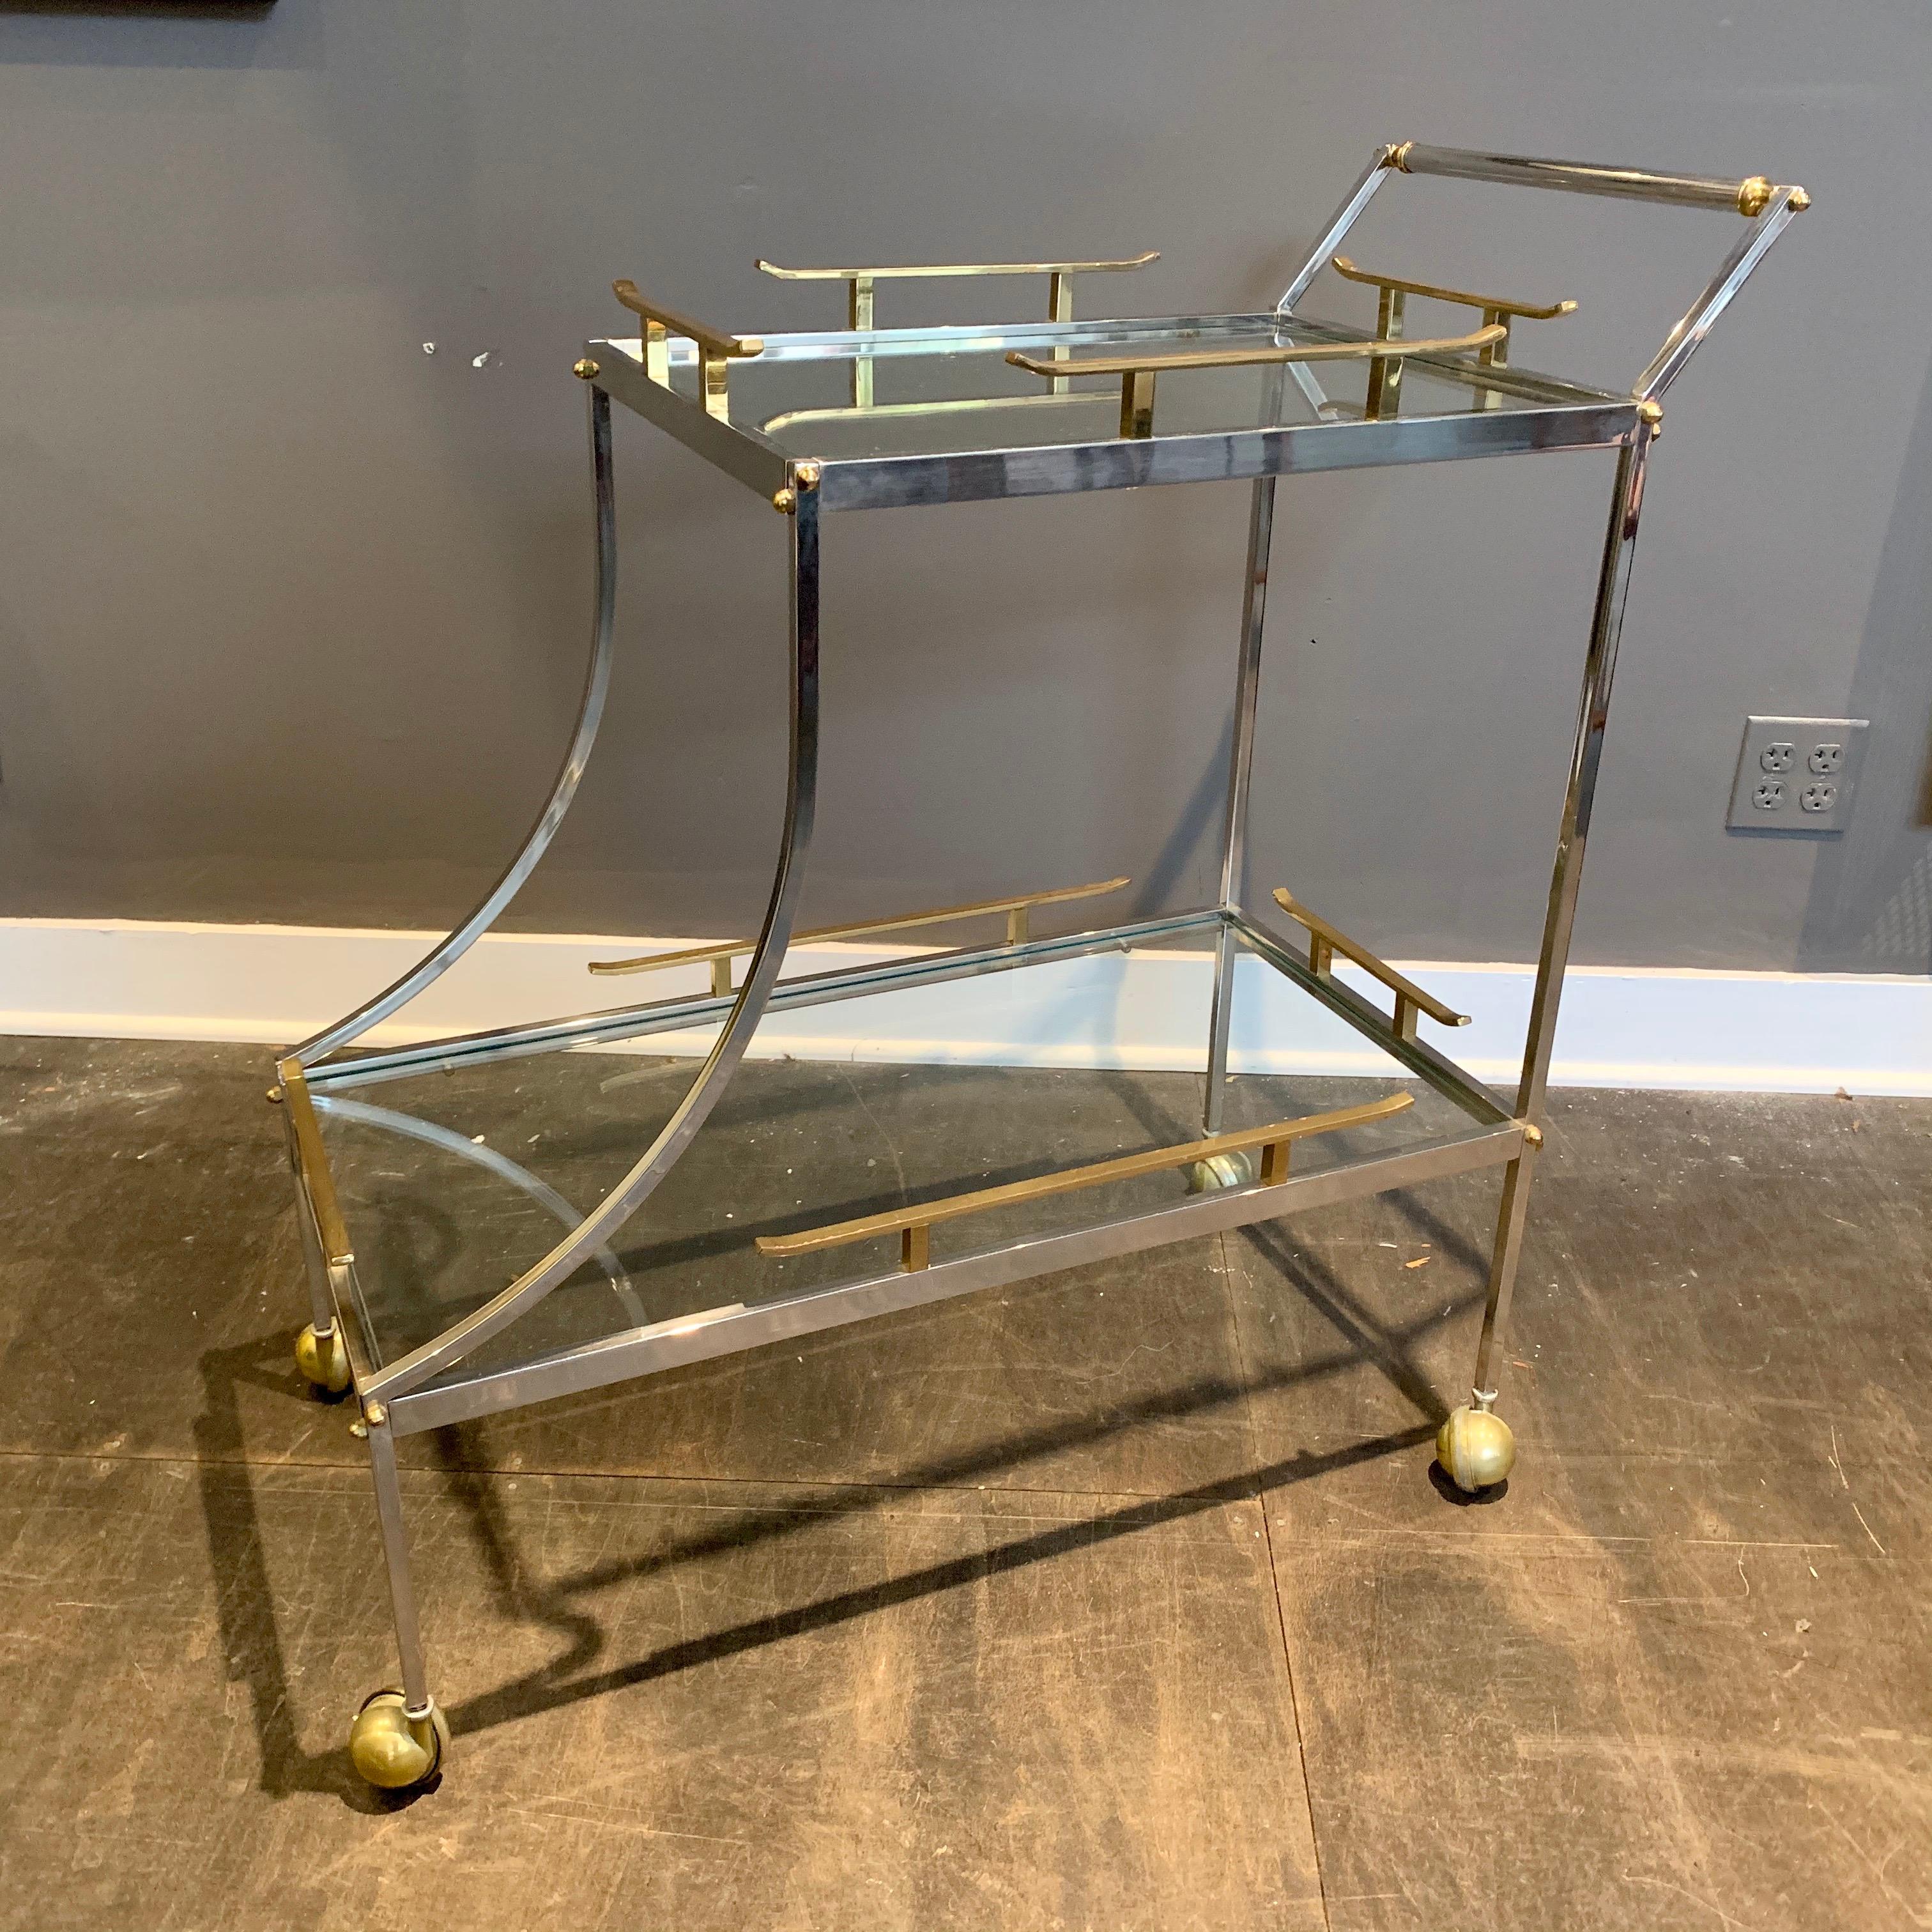 This unique rolling cart features brass and steel on two levels. The upper tier's brass rails and ski-slope style drop to the larger lower tier is what we love about this rolling cart. All original and in wonderful vintage condition.

Note: height